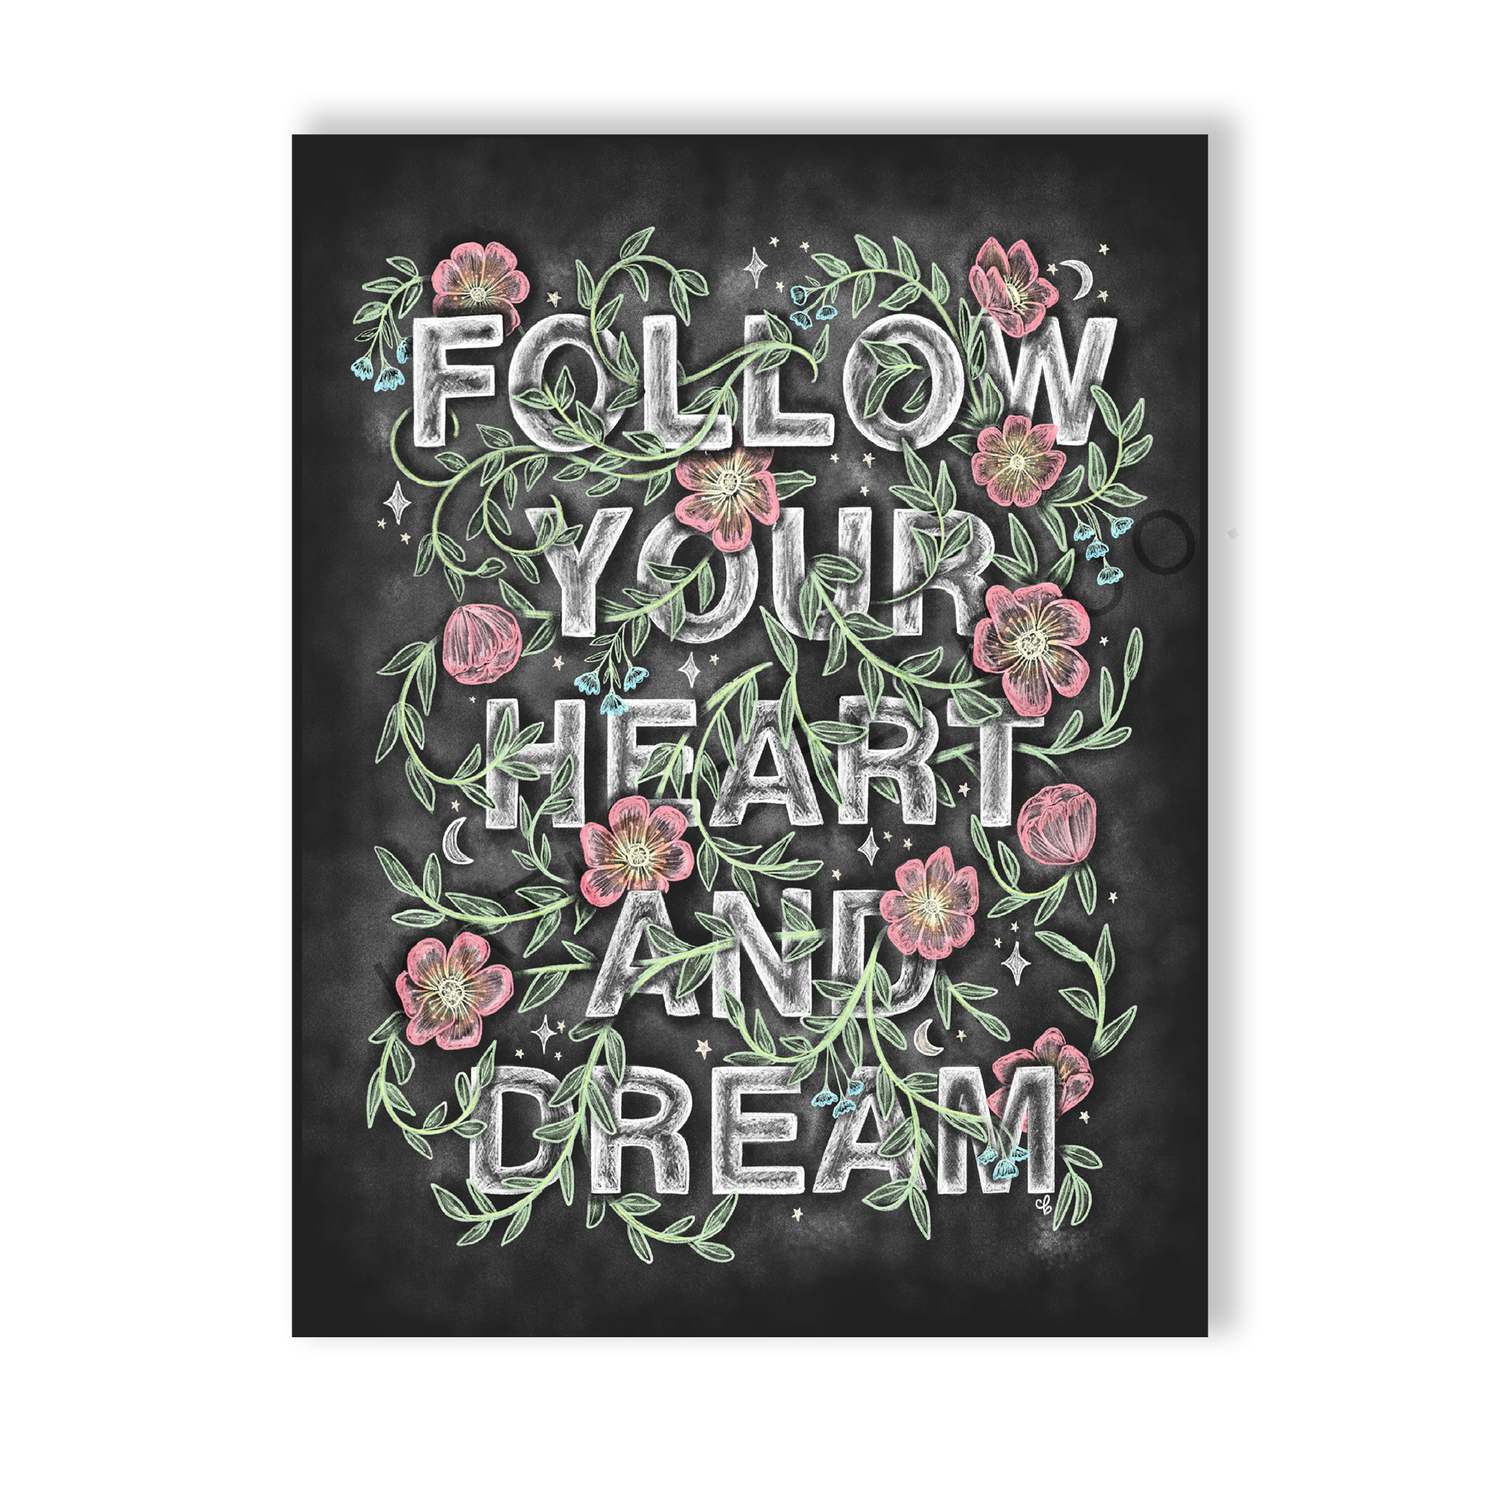 Follow your heart and dream. chalkboard print. chalk art. Pink flowers. lush greenery intertwined in block letters. stars and moons accents. 8 x 10 print. Unframed. Katie Belle Co. 